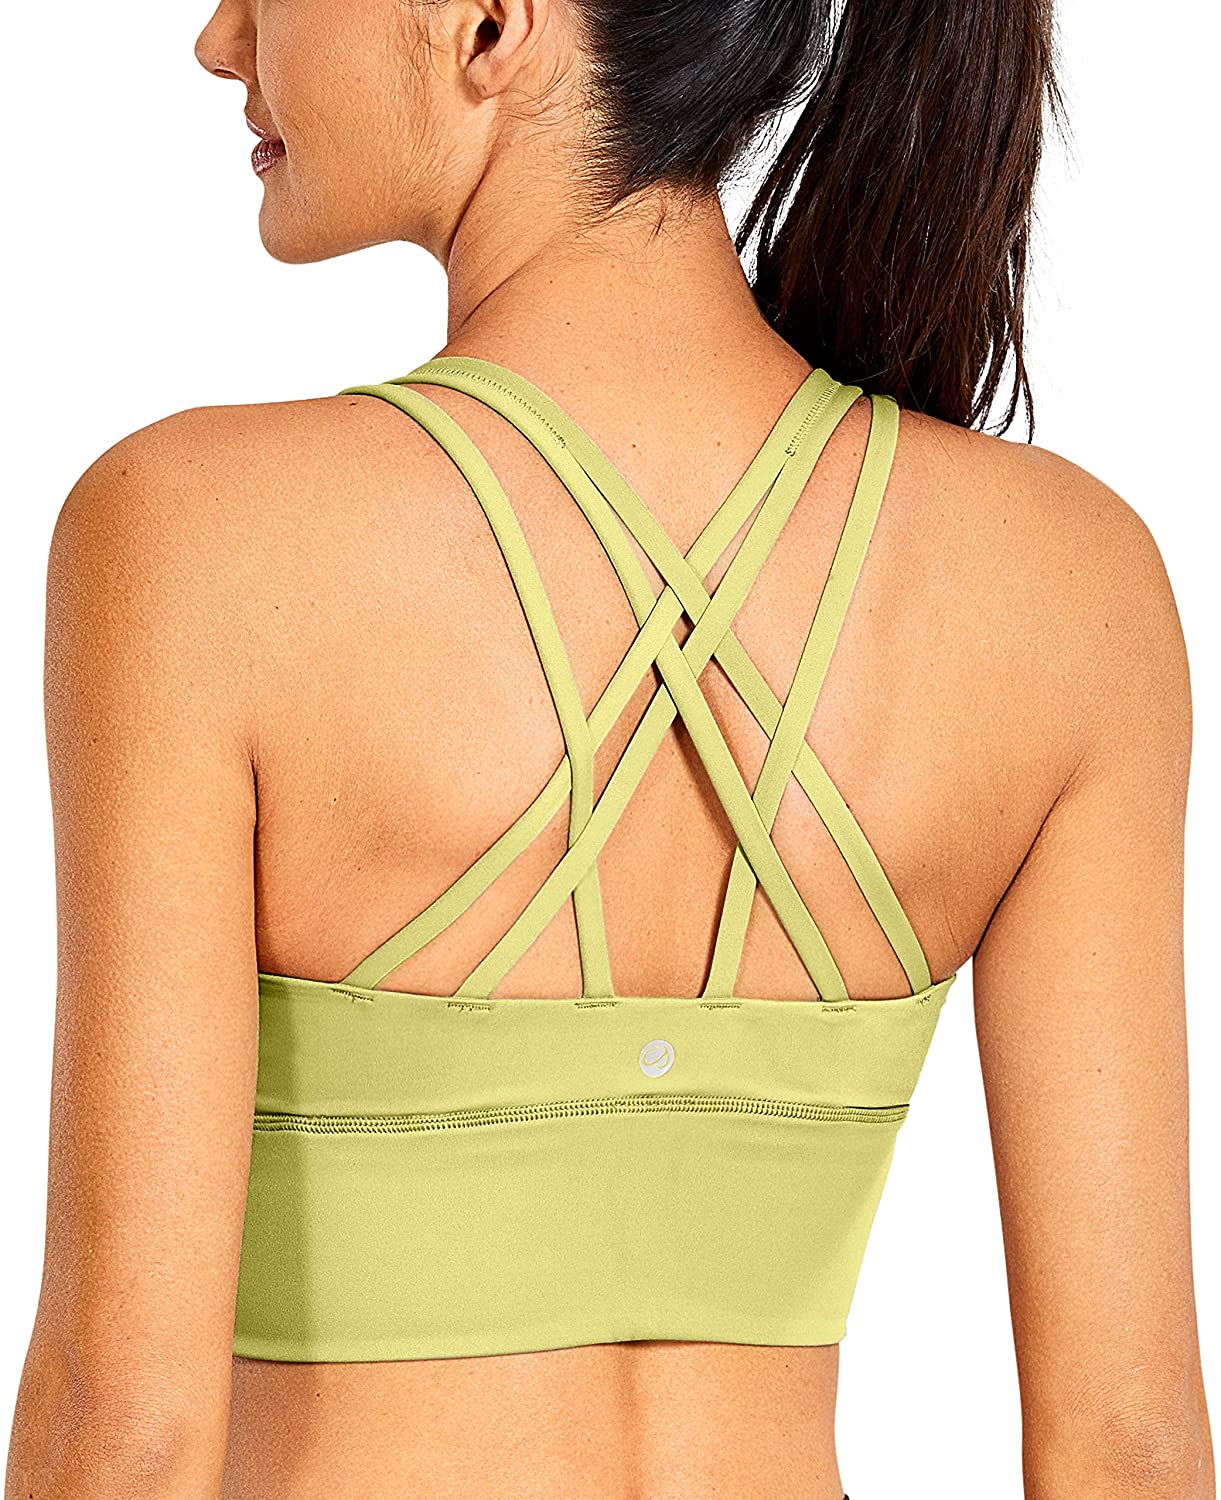 Buy CRZ YOGA Strappy Longline Sports Bras for Women - Wirefree Padded Criss  Cross Yoga Bras Cropped Tank Tops Black Medium at